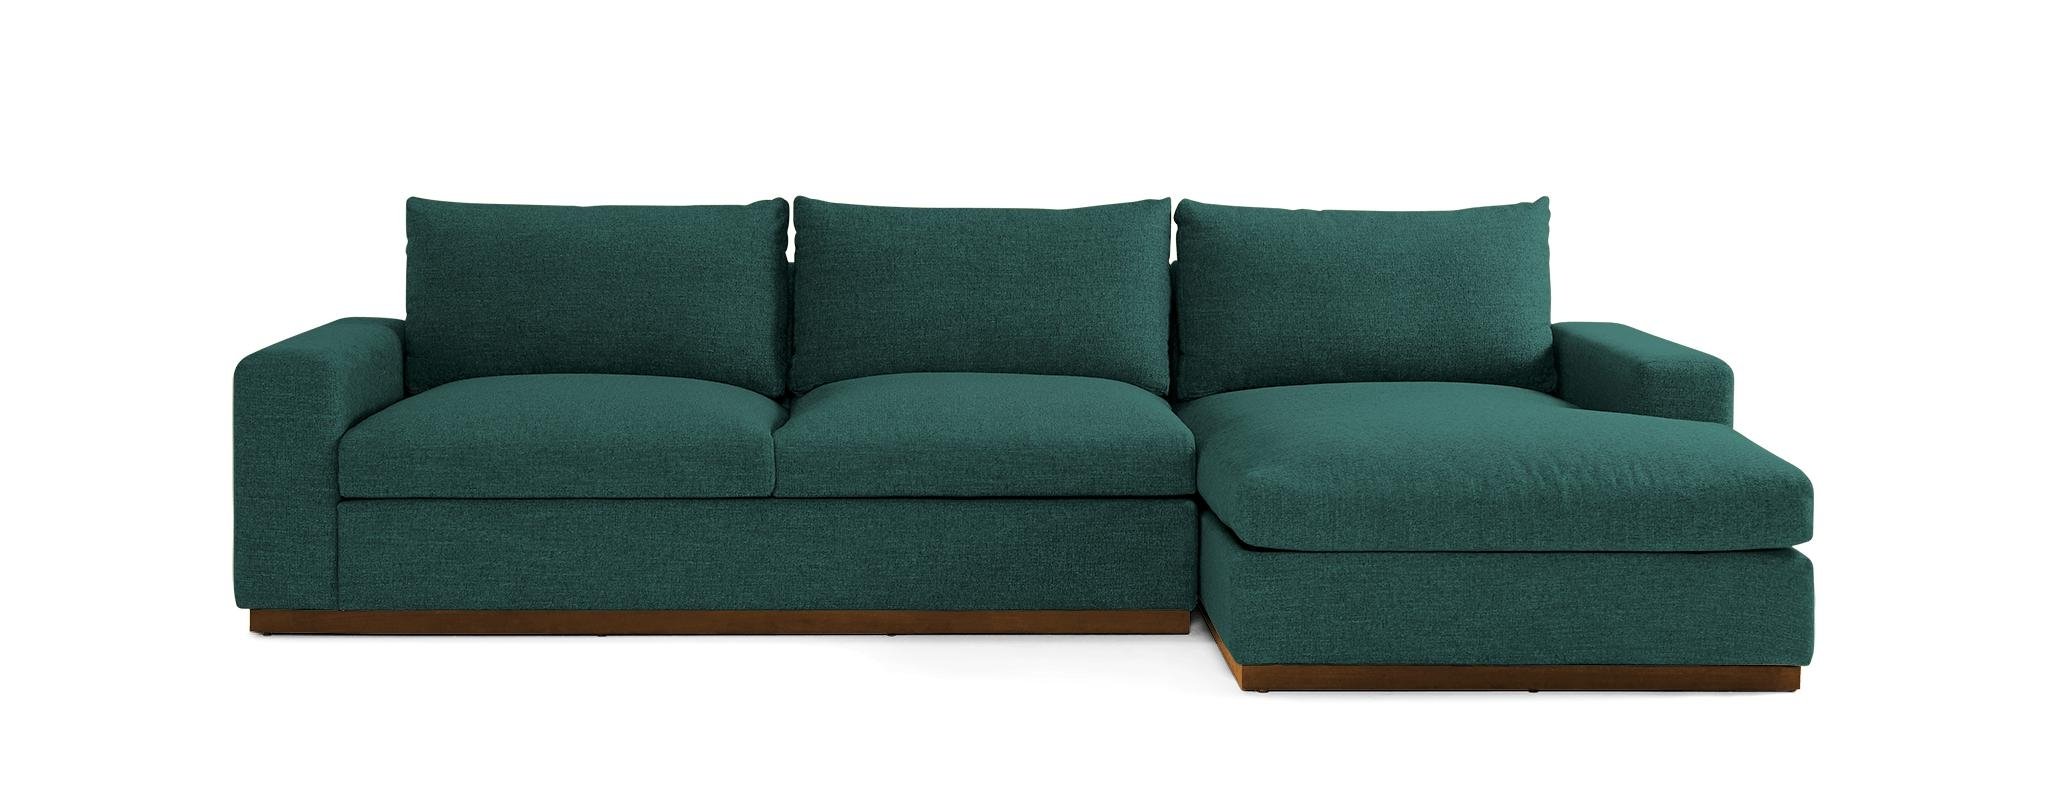 Blue Holt Mid Century Modern Sectional with Storage - Prime Peacock - Mocha - Left - Image 0